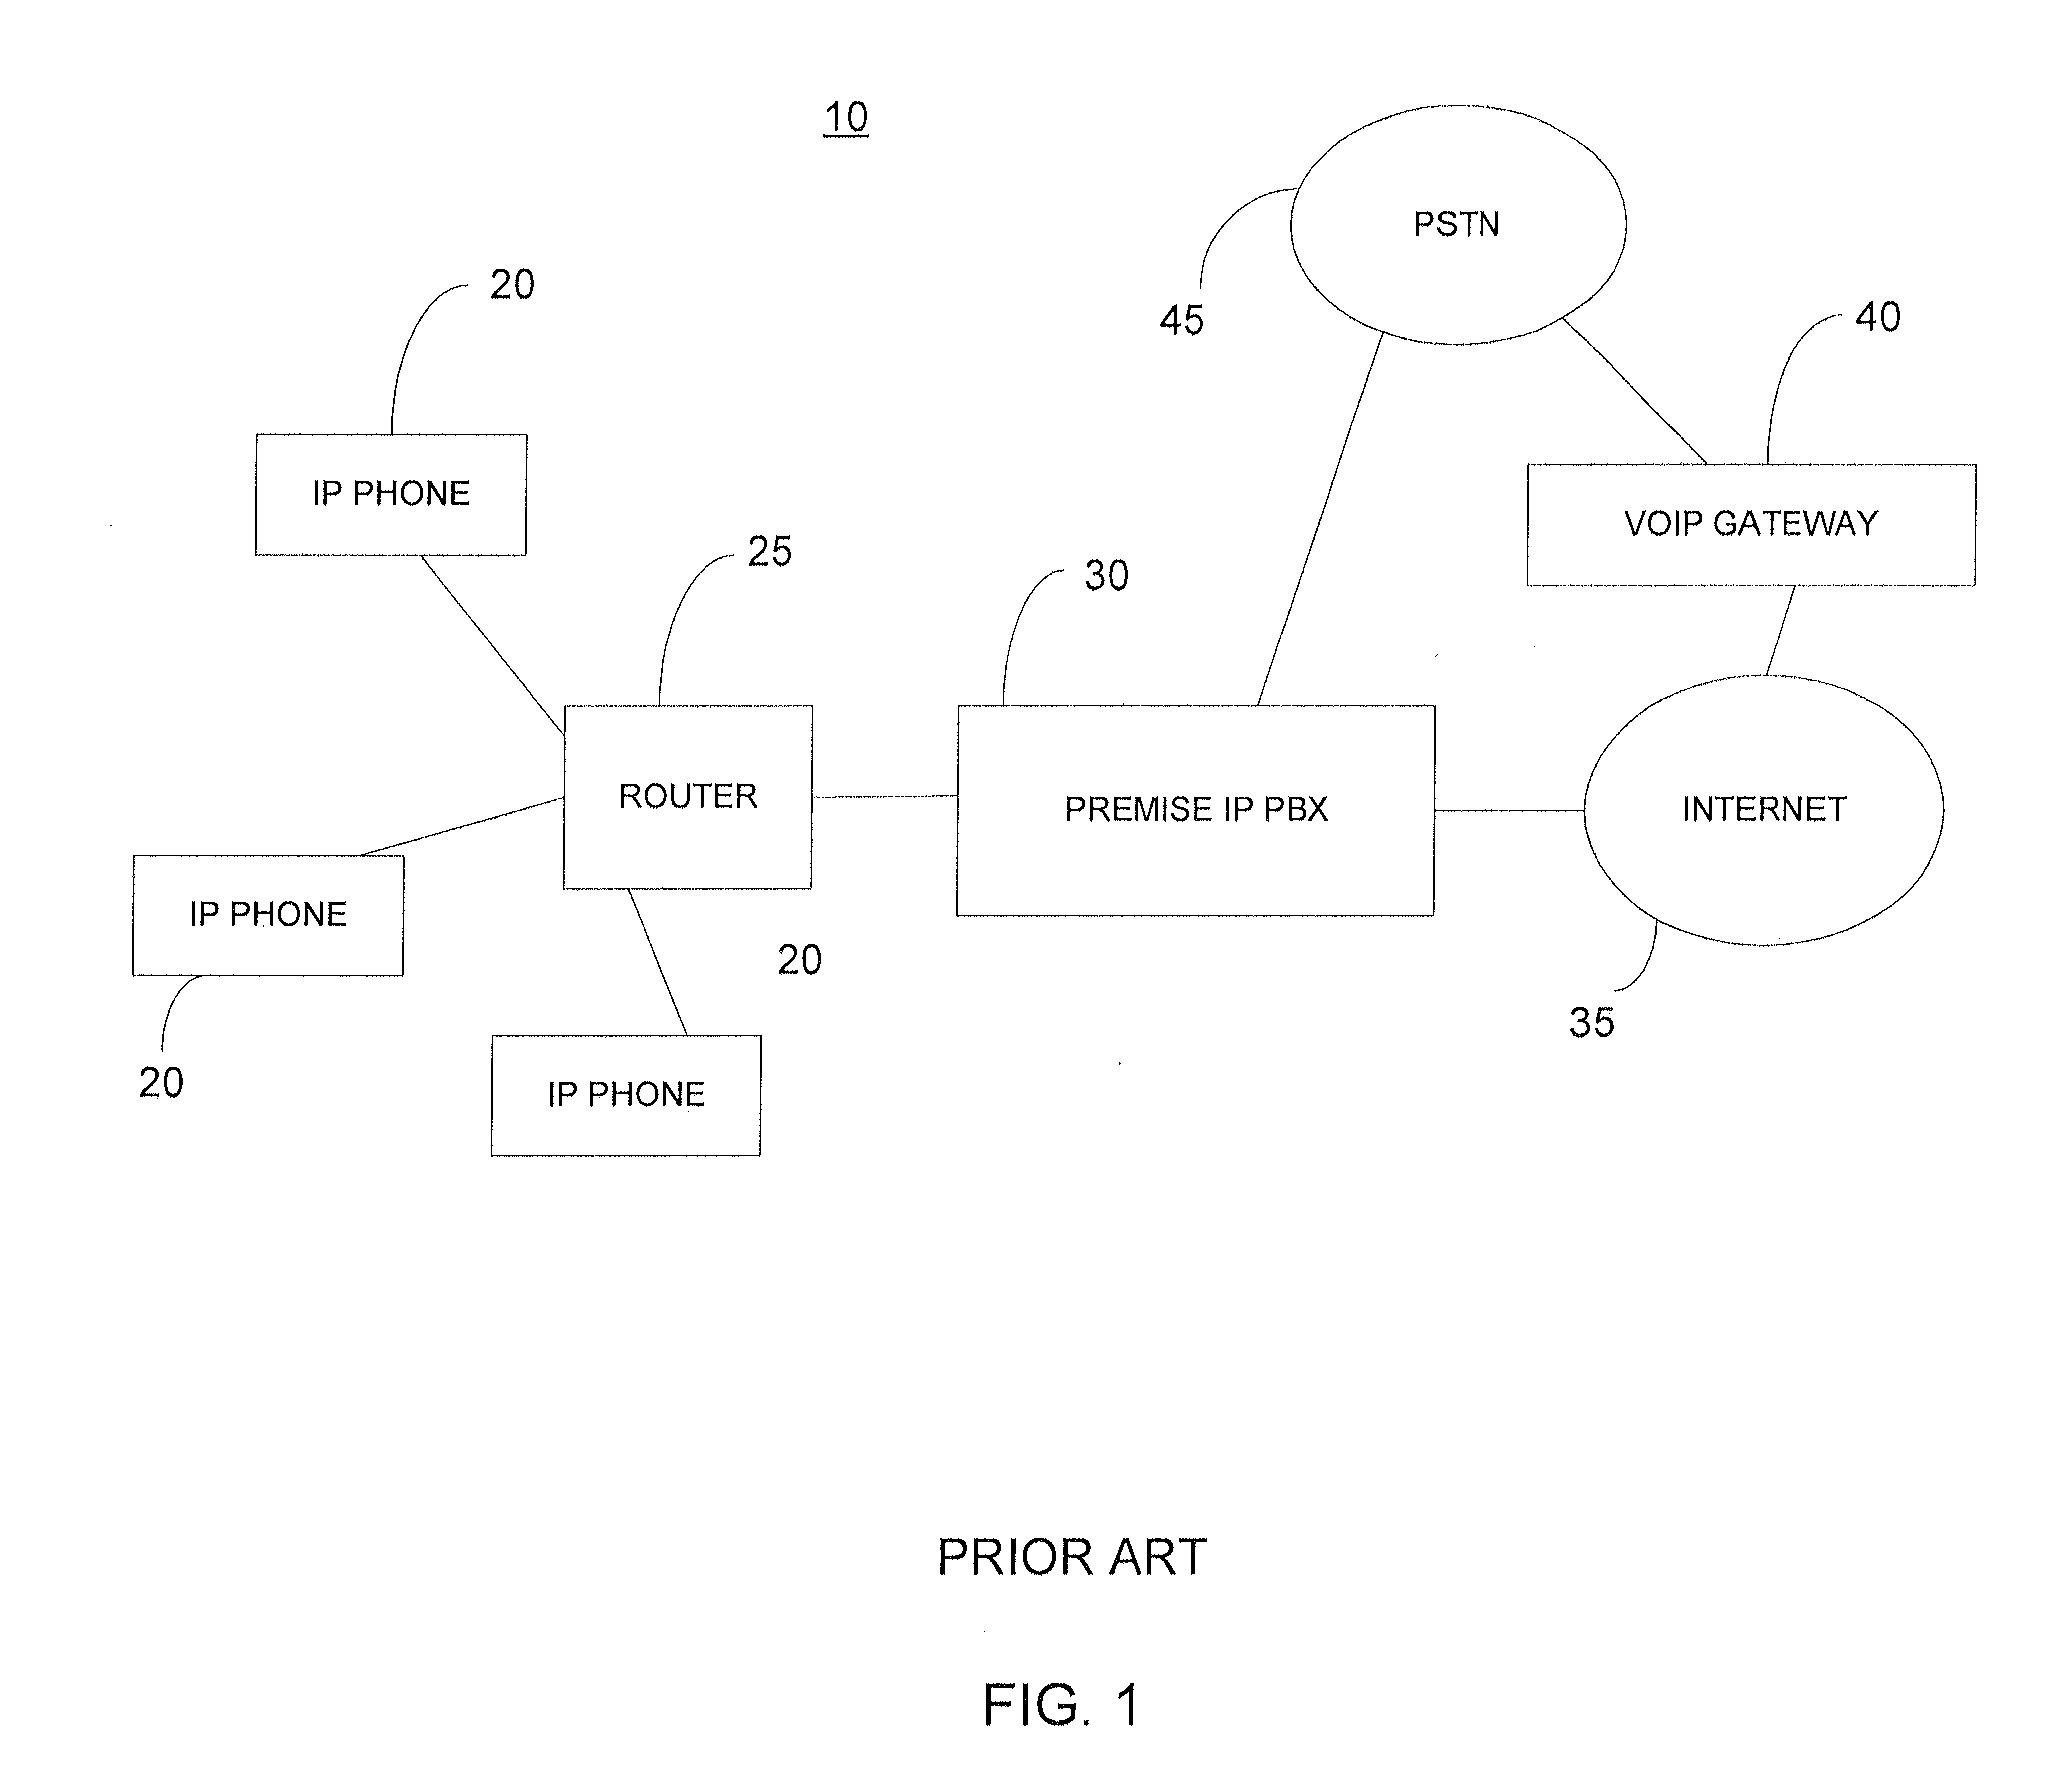 System and method for providing IP pbx service